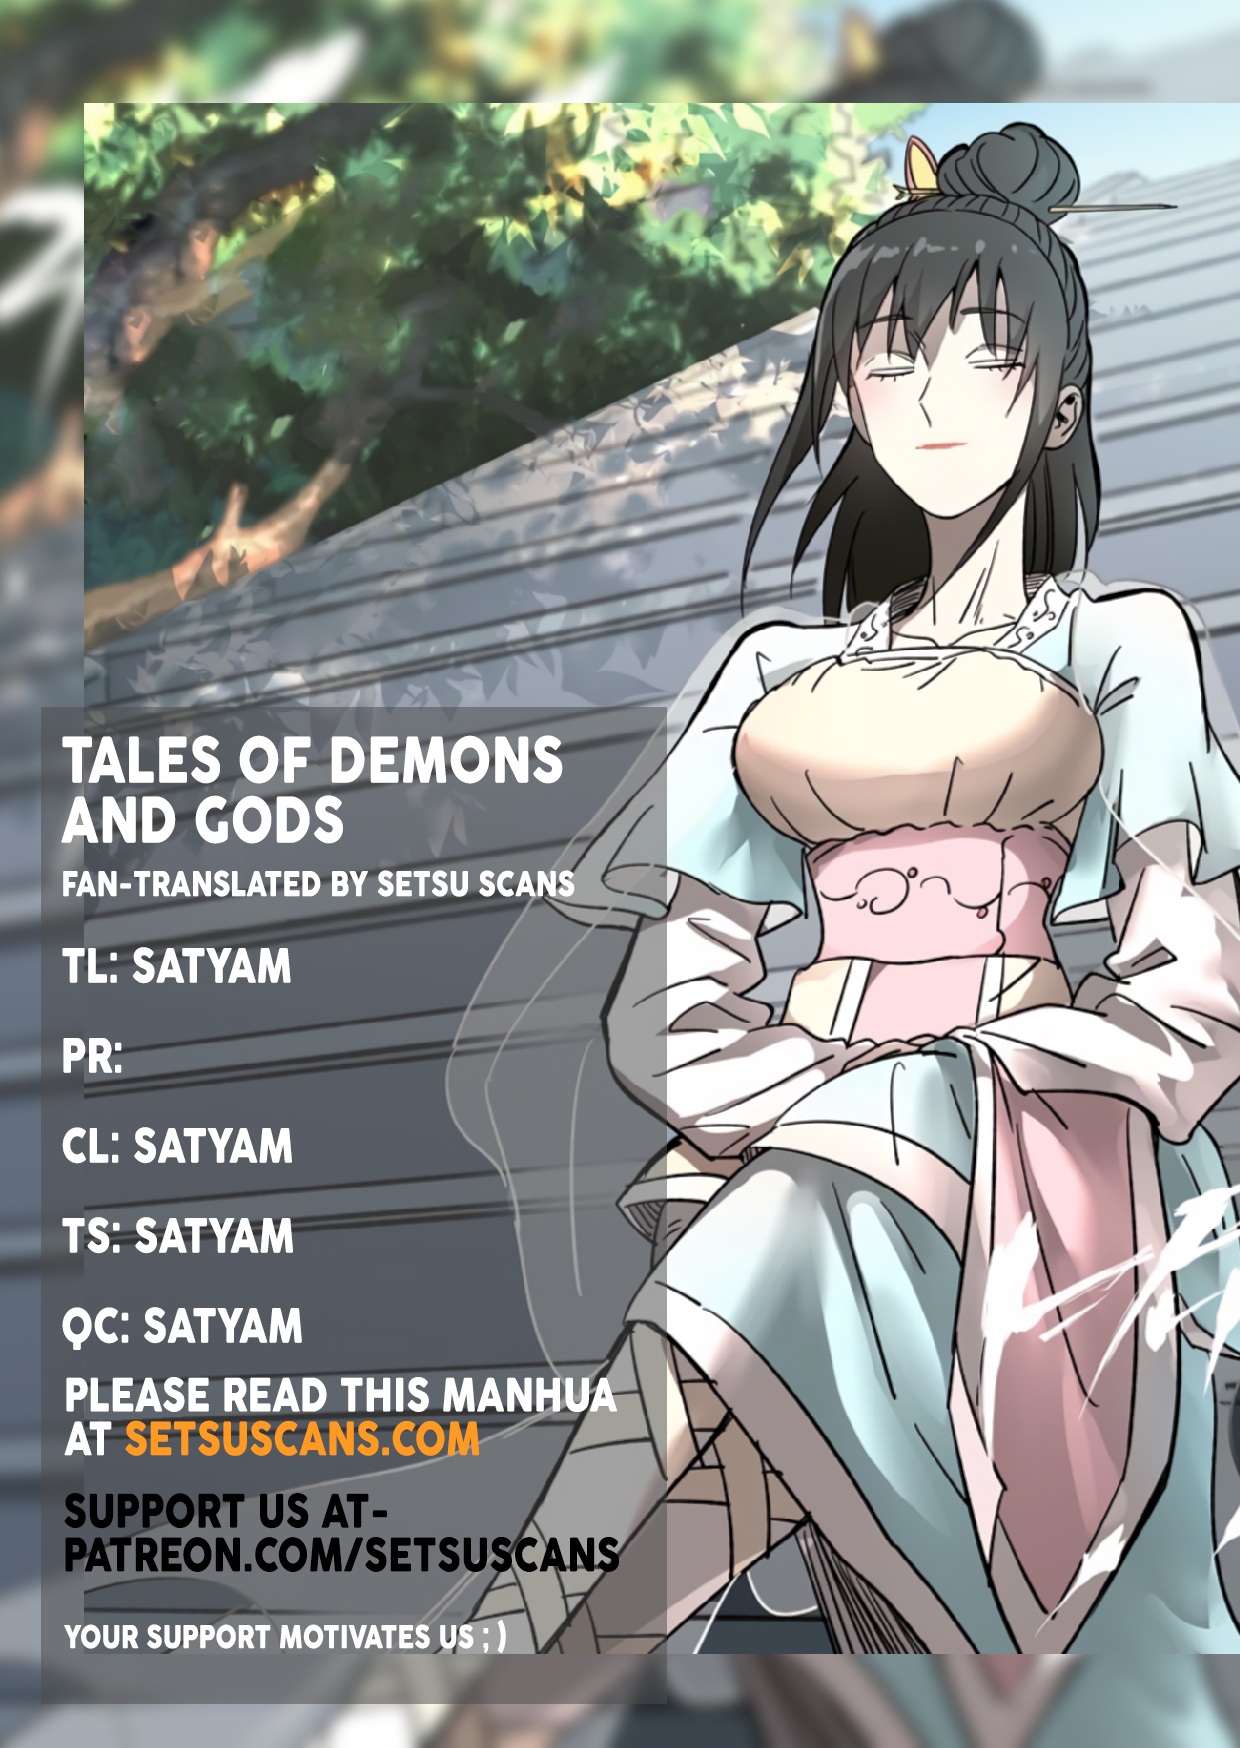 Tales of Demons and Gods - Chapter 26107 - Demon God’s Sect (2) - Image 1